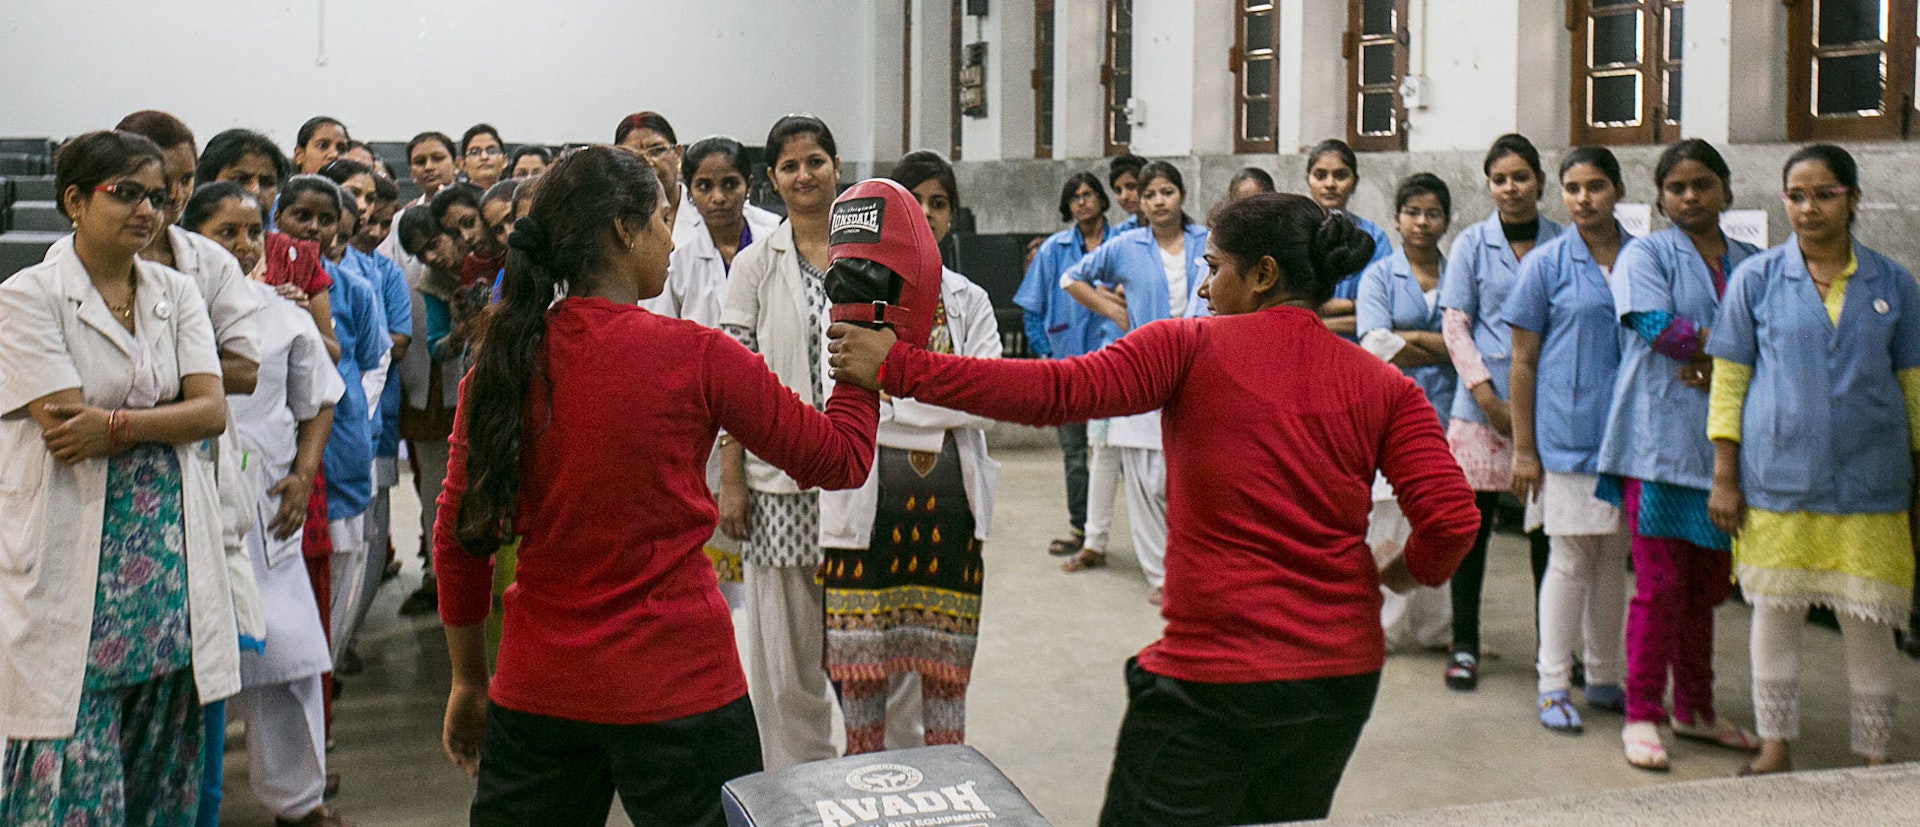 The Indian women learning to fight for survival